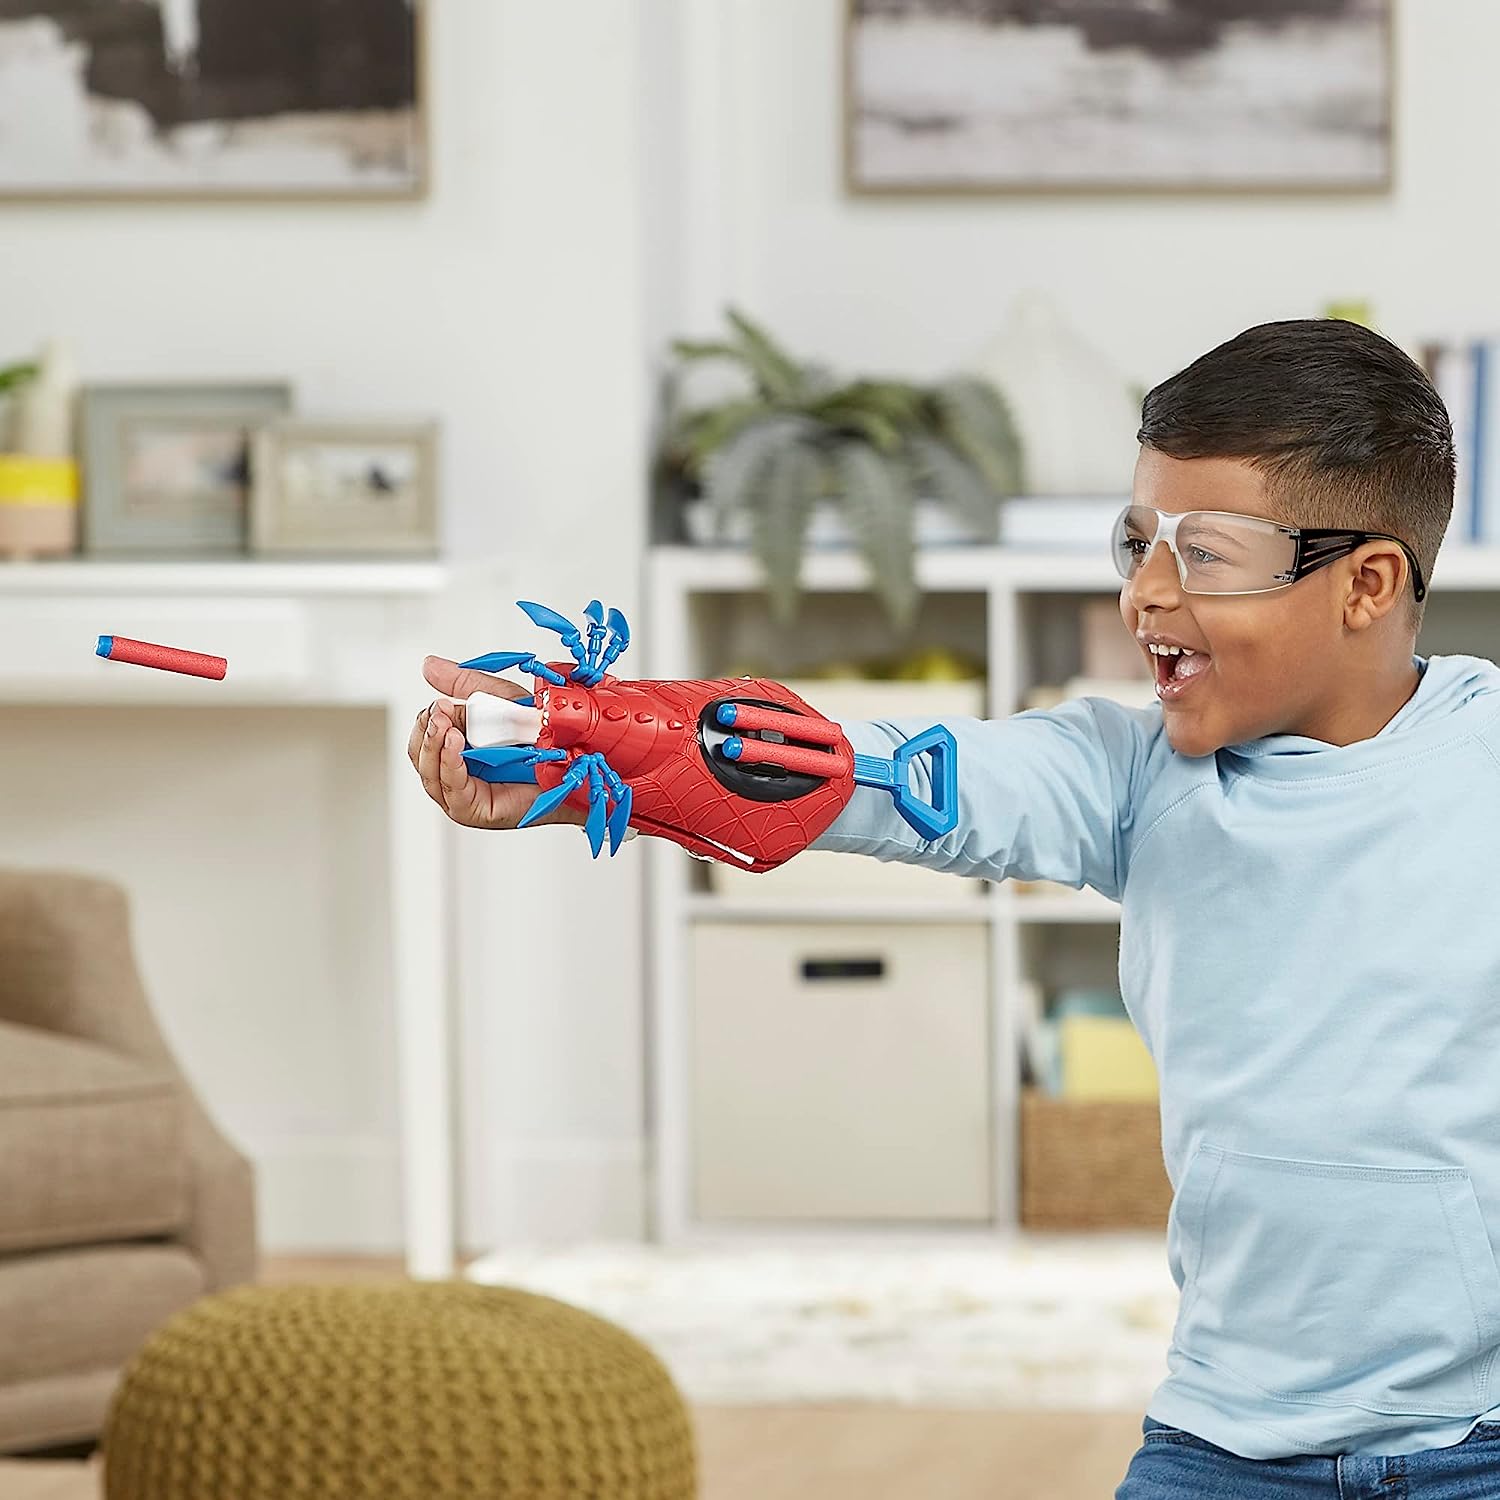 Marvel Mech Strike Mechasaurs Spider-Man Arachno NERF Blaster with 3 Darts for Kids Ages 5 Years and Up